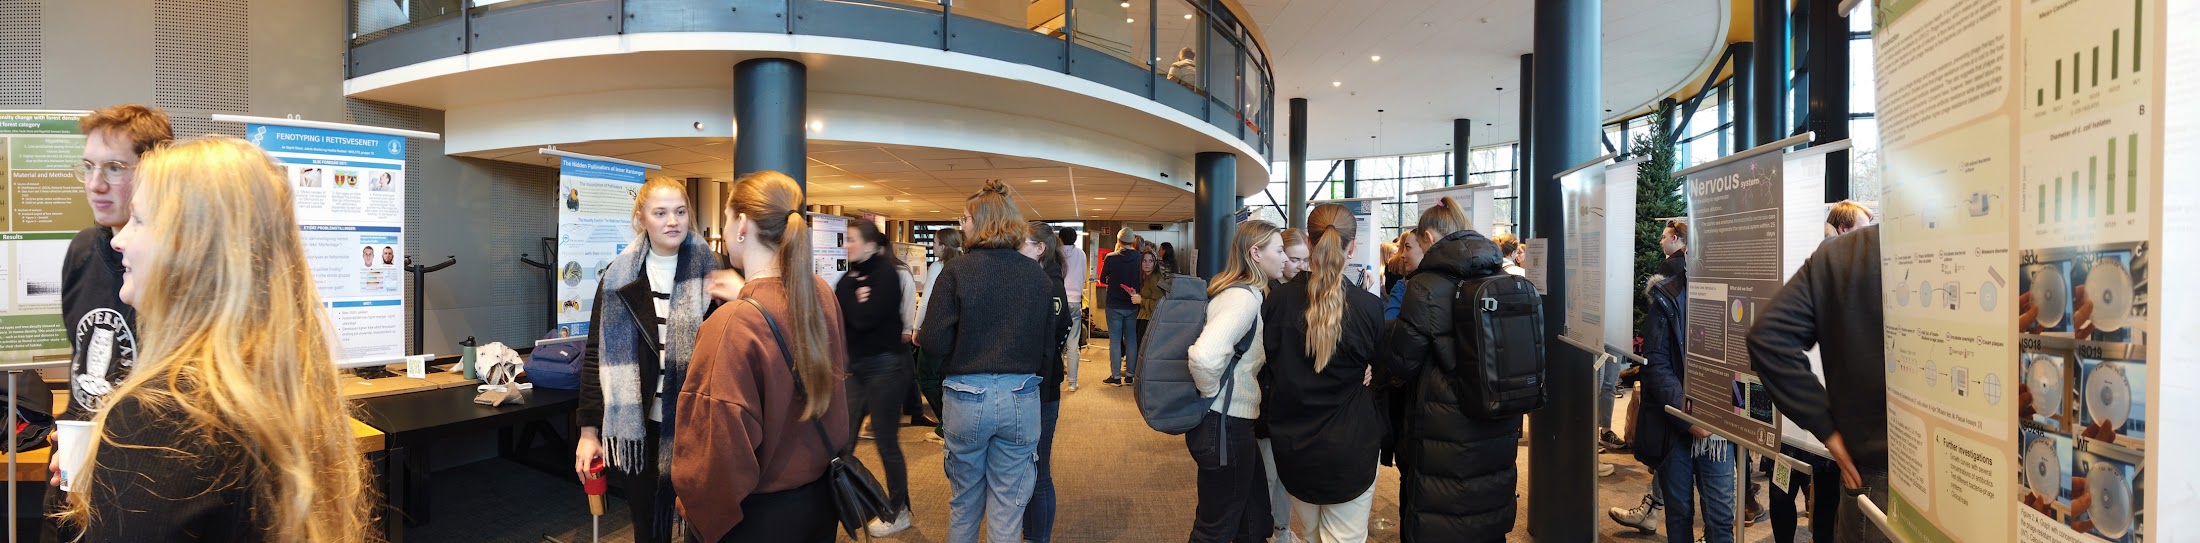 Students gathered at Vilvite for the poster symposium